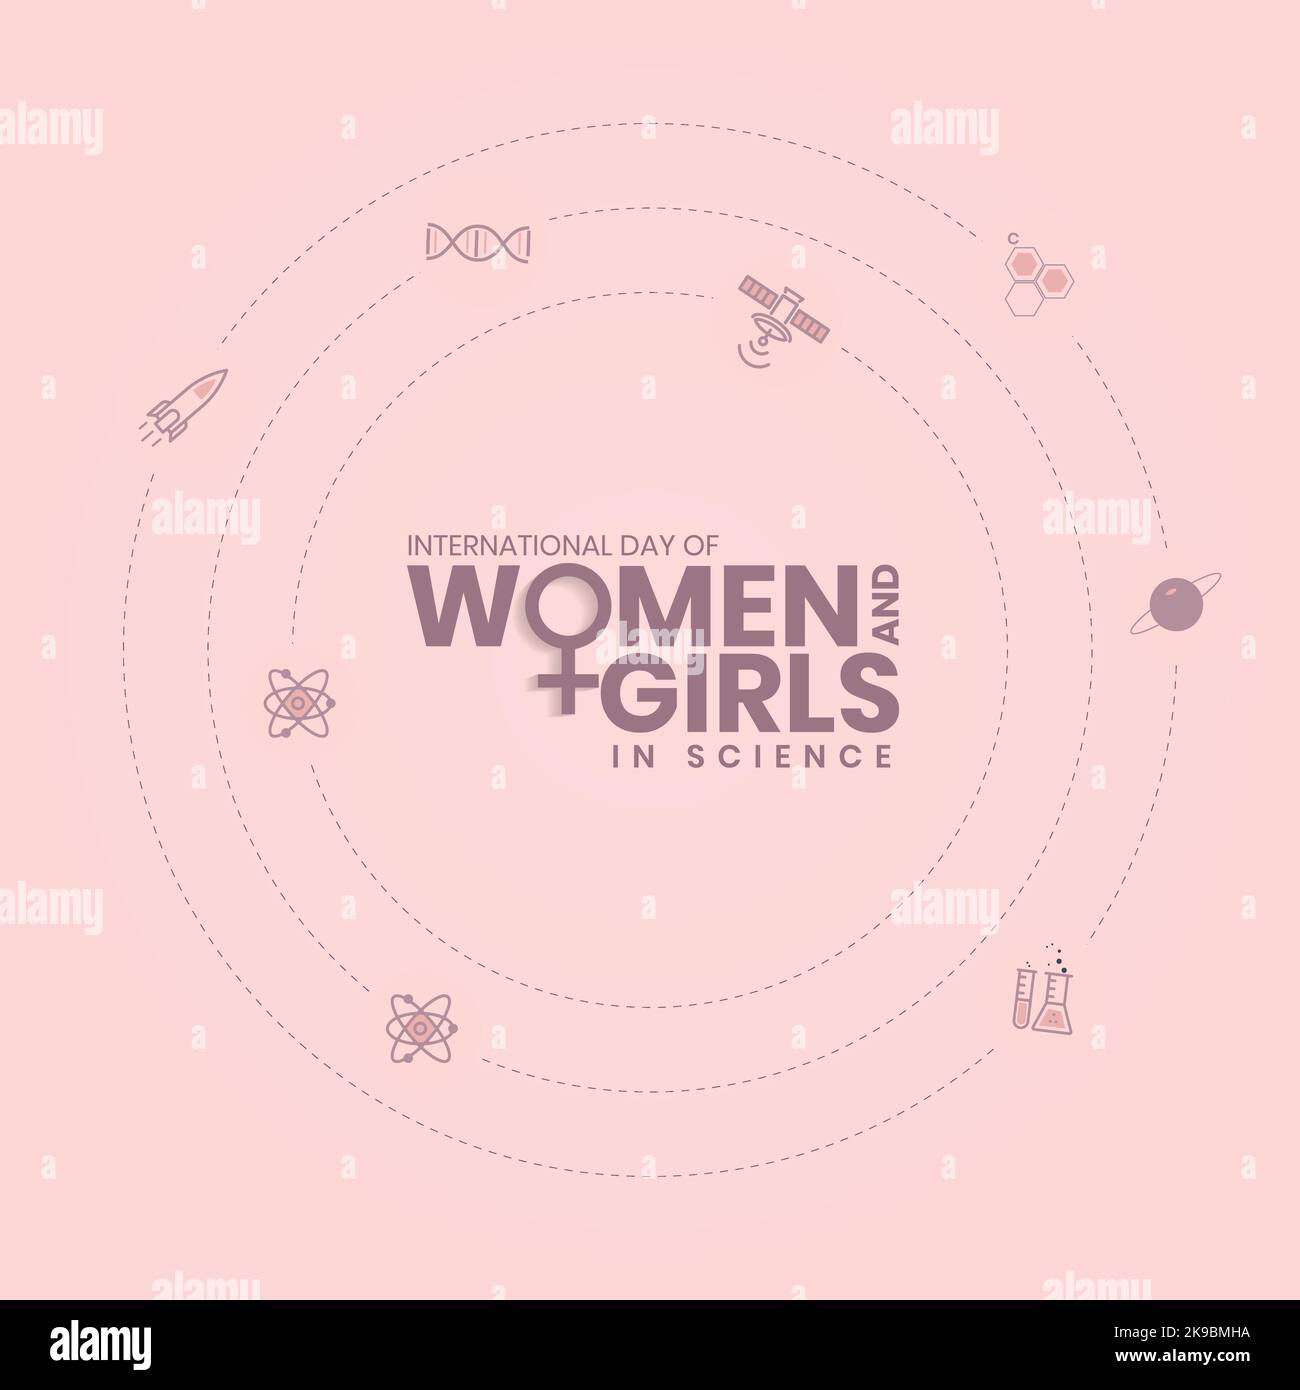 International Day of Women and Girls in Science on February 11 Background Stock Vector